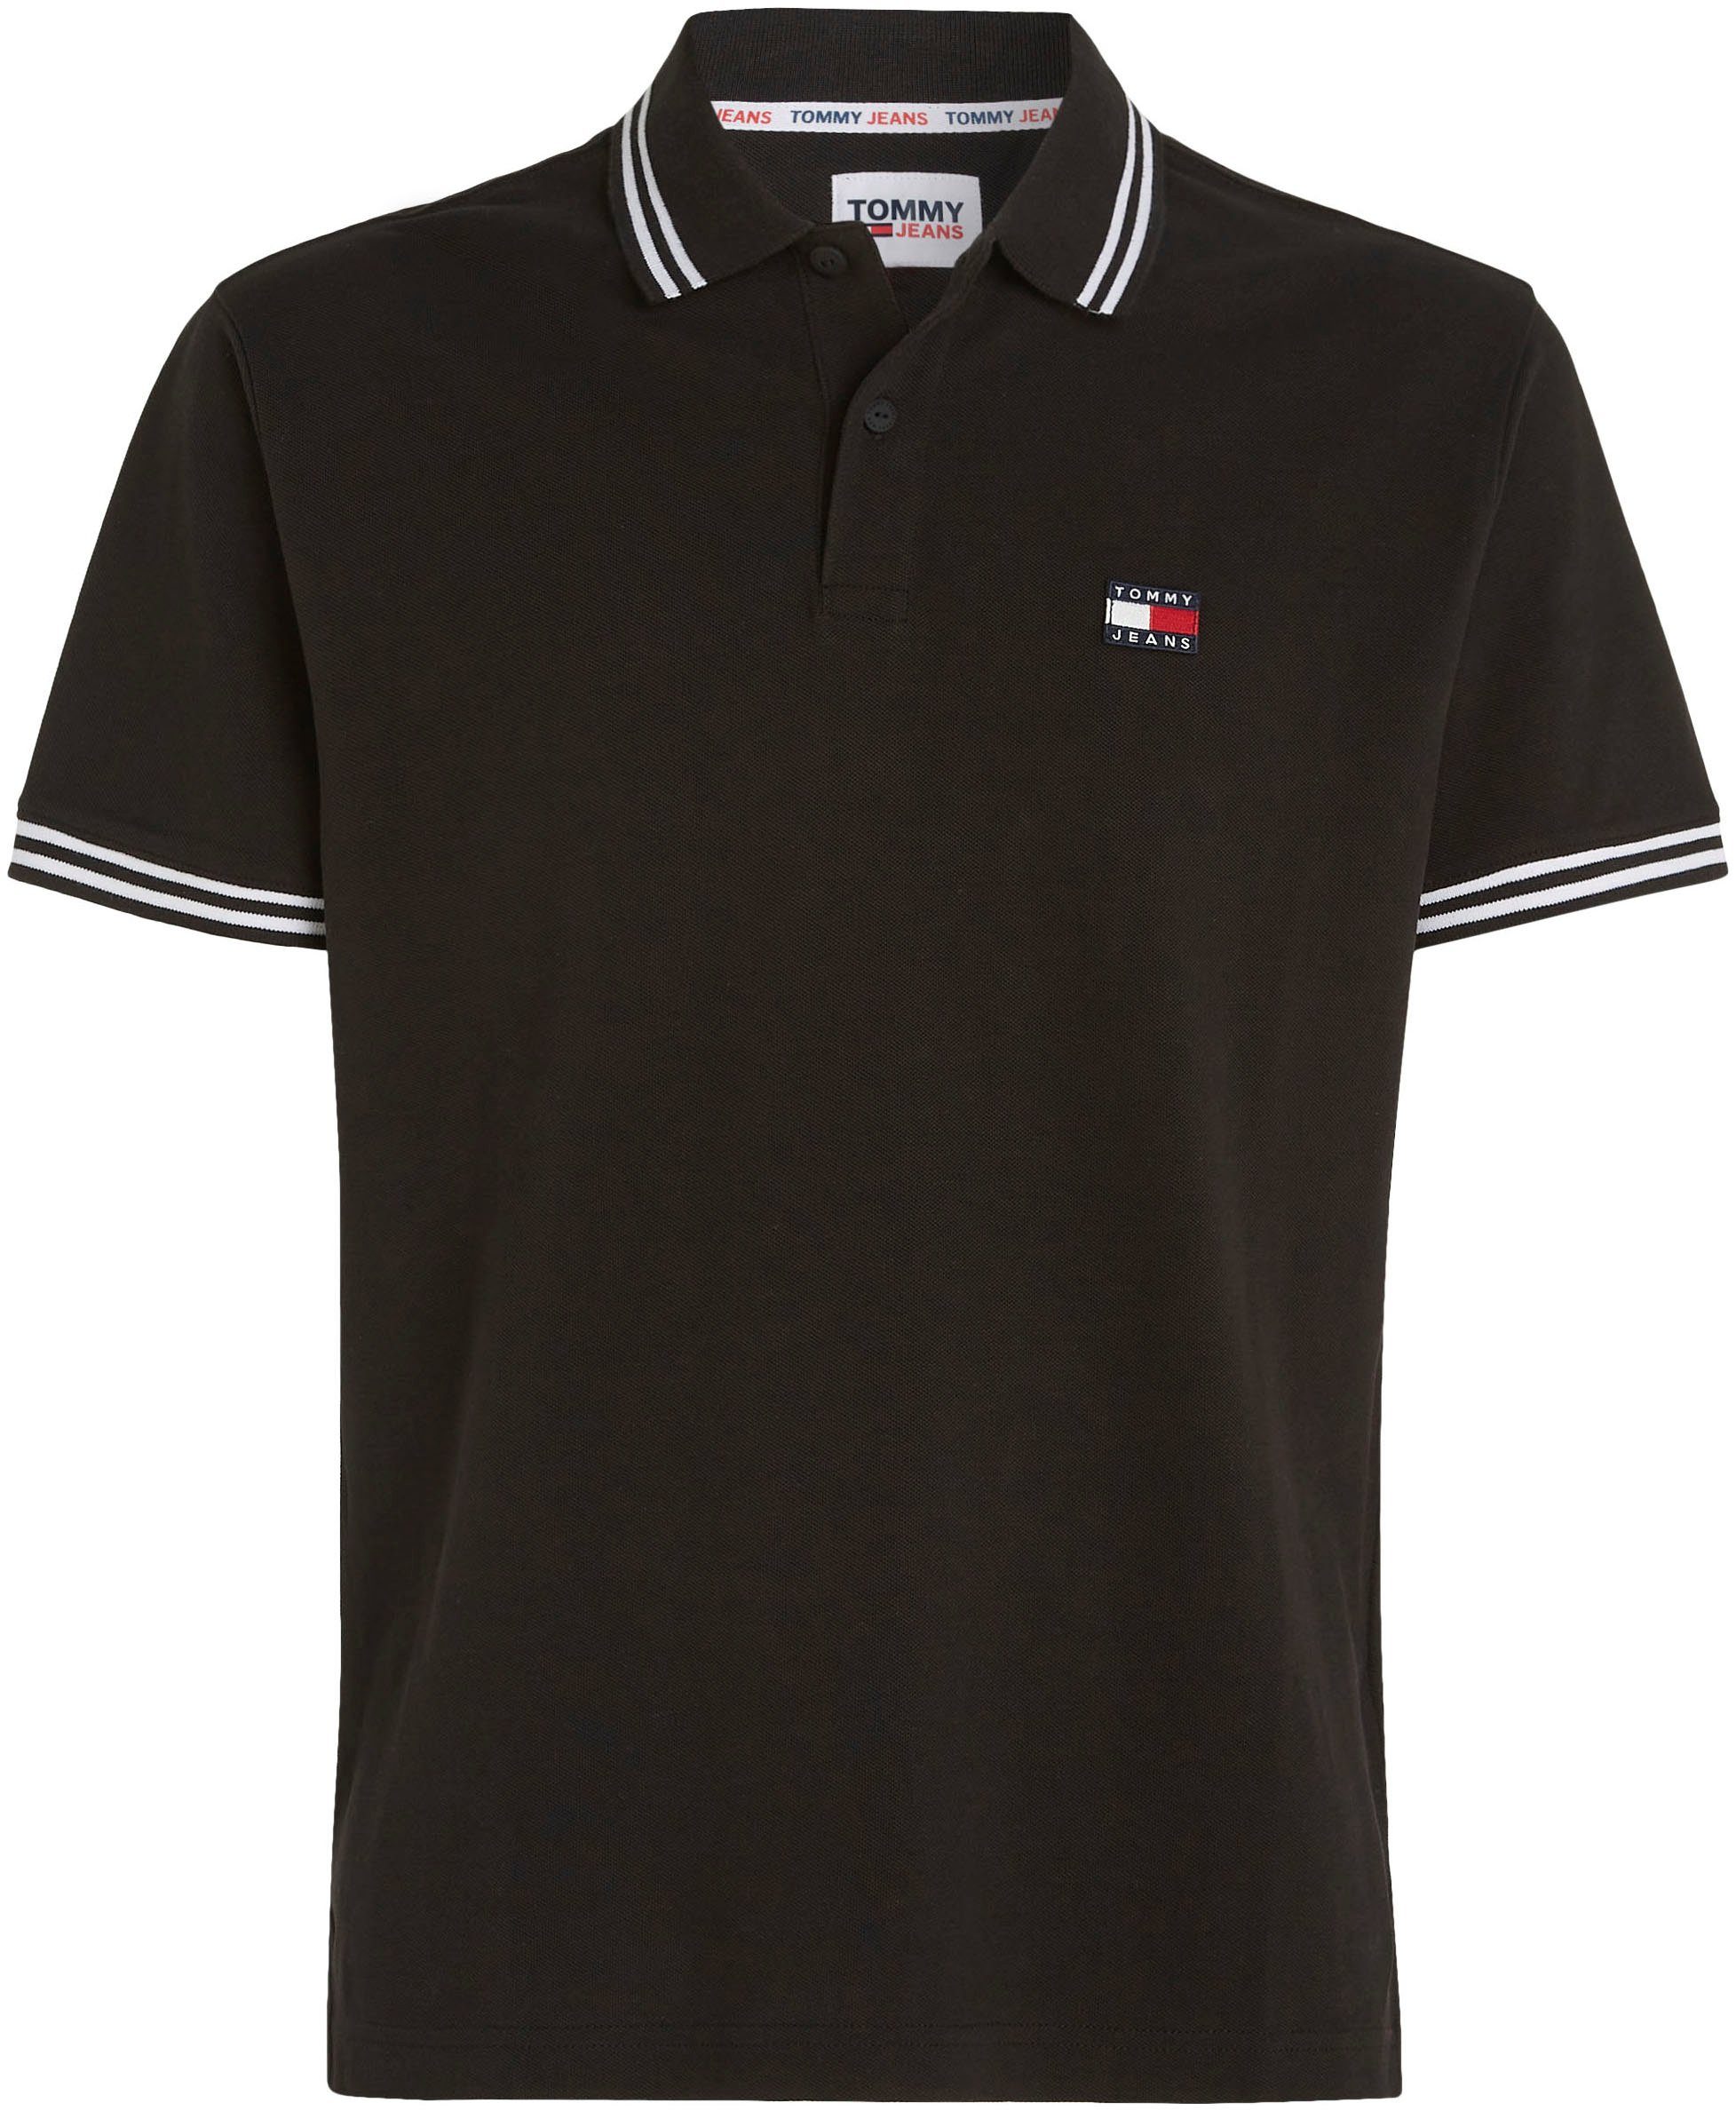 Tommy Jeans Black TJM POLO DETAIL CLSC TIPPING Poloshirt